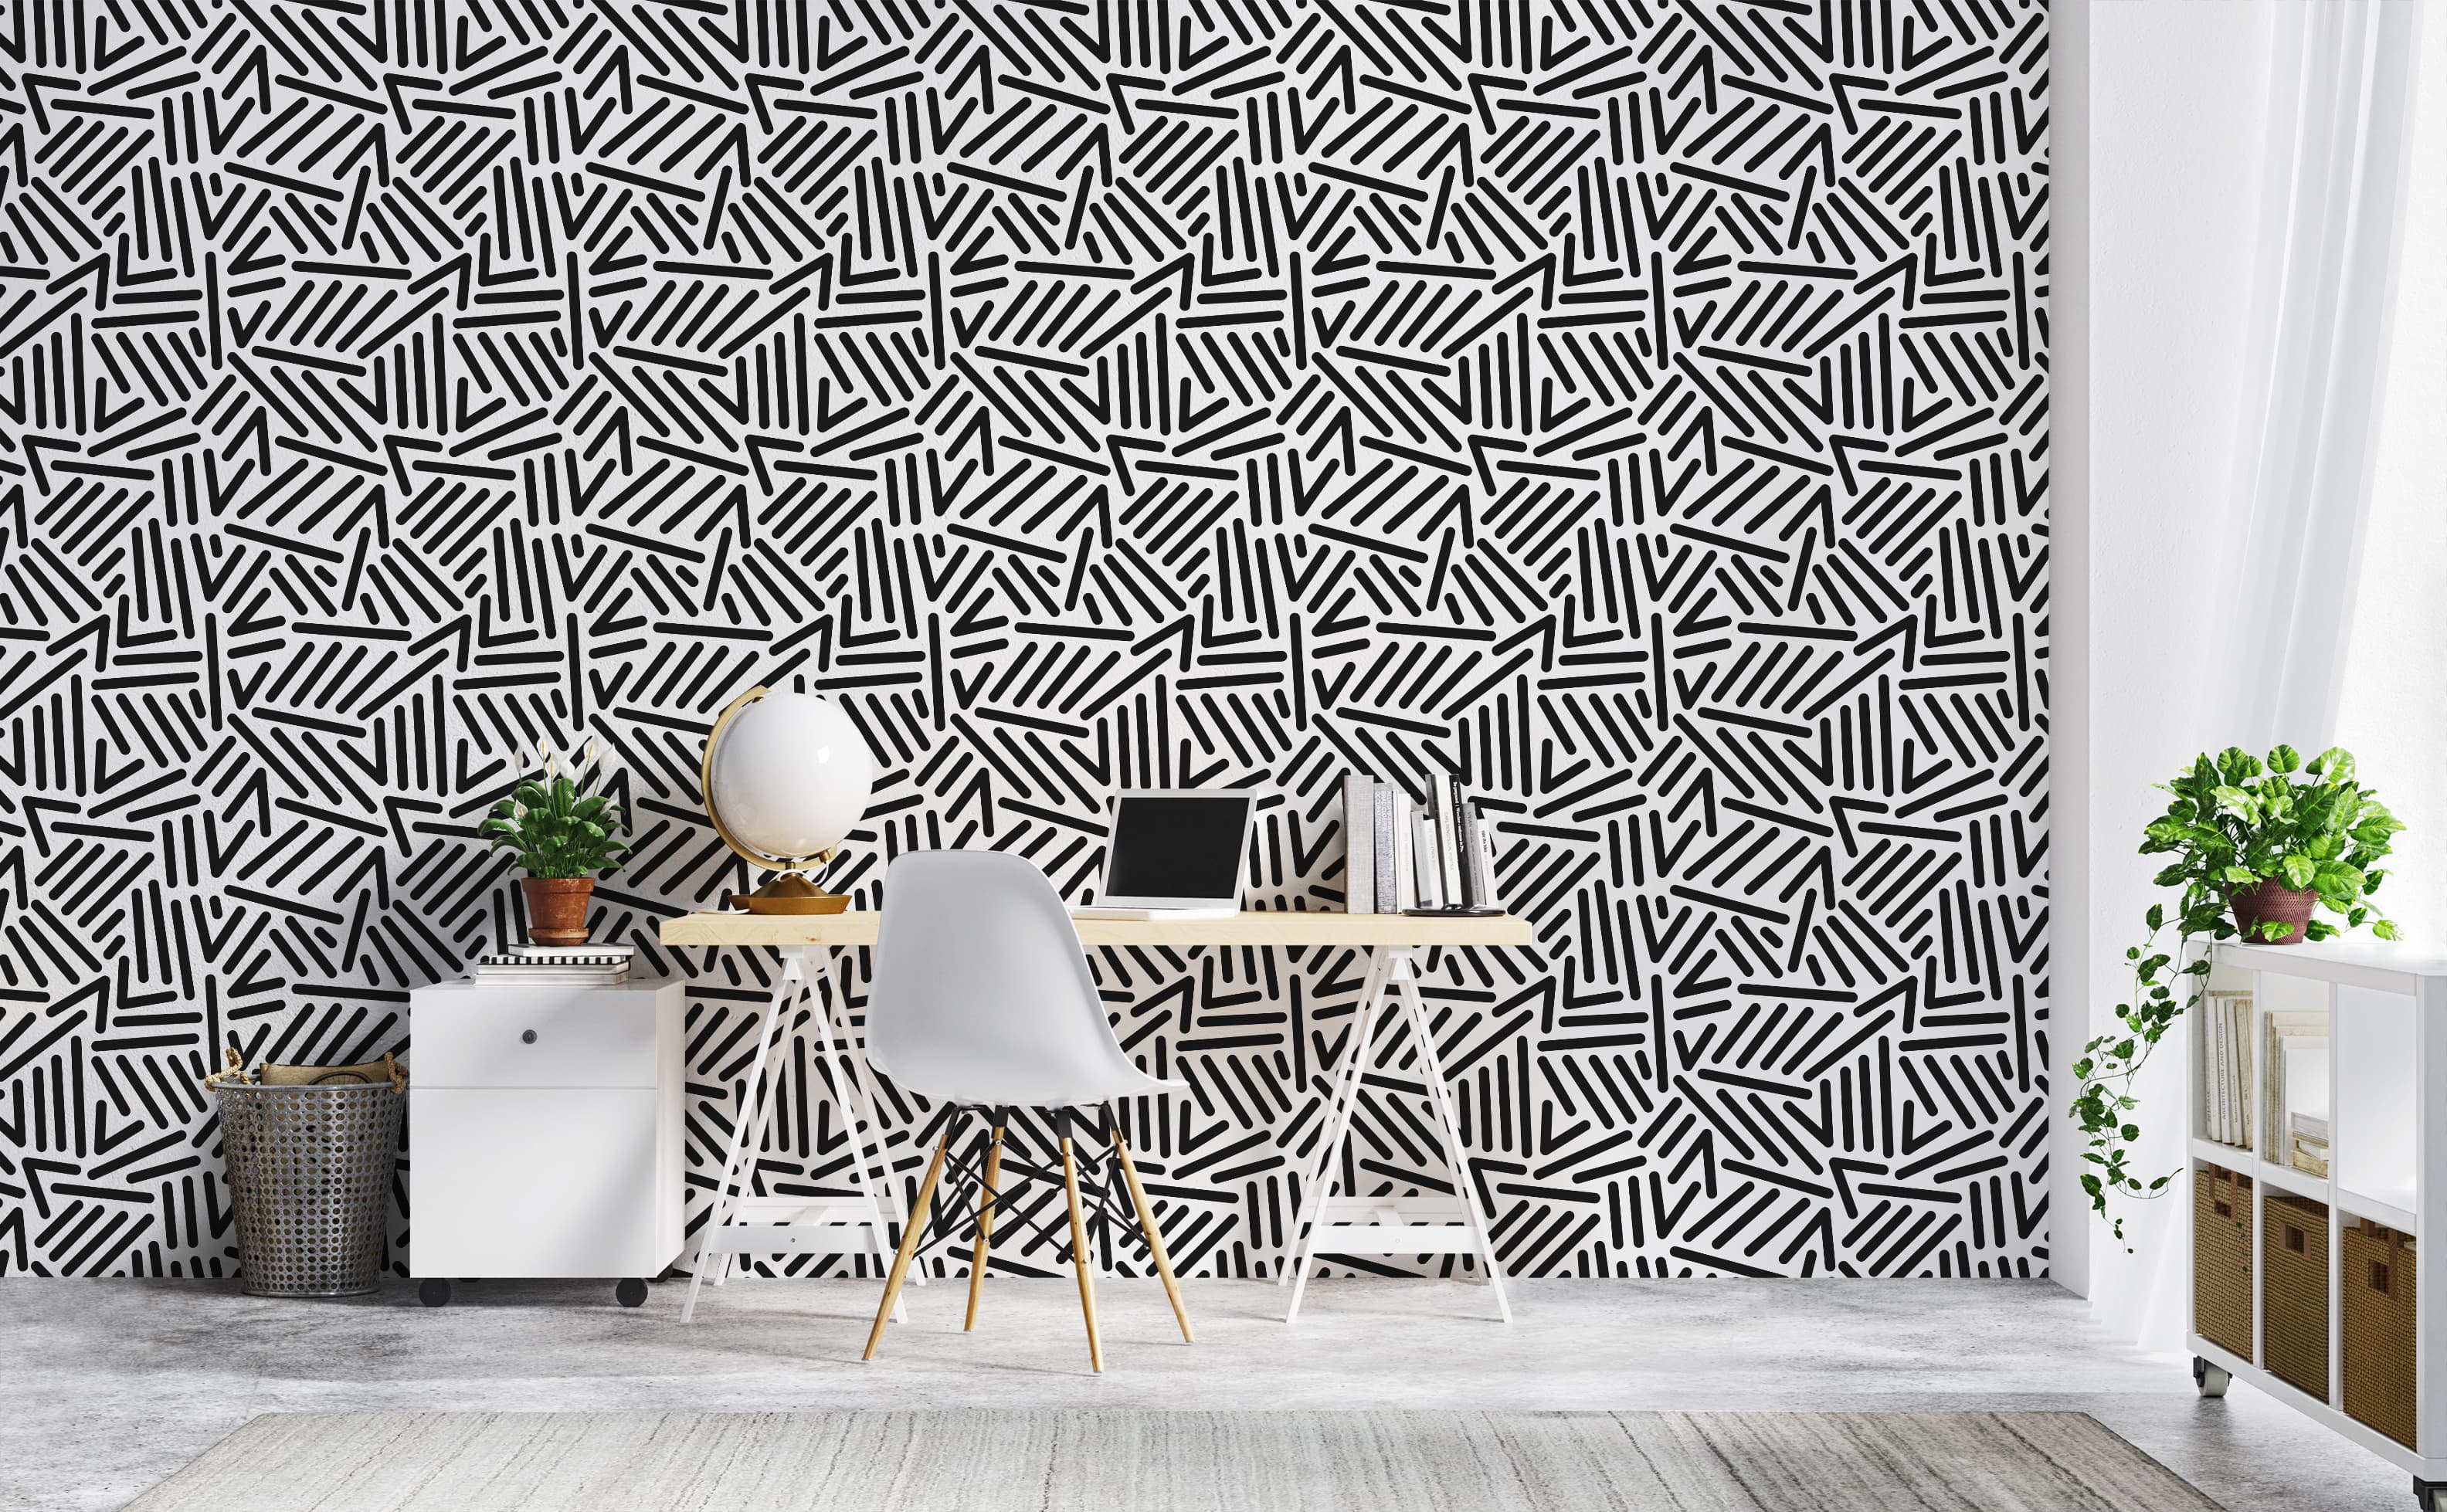 The Best Wallpaper Ideas for a Small Space | Apartment Therapy